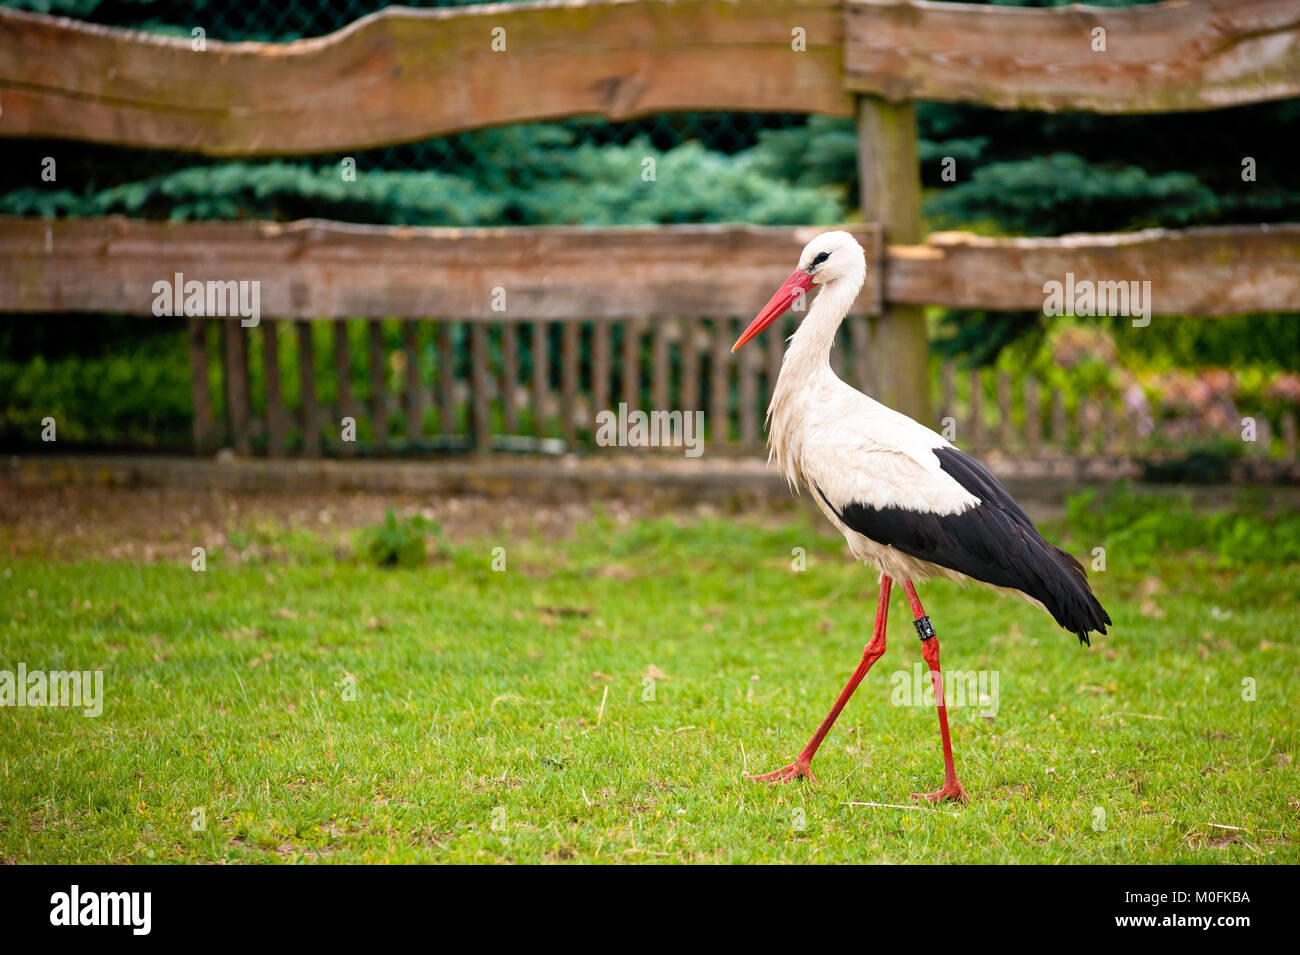 White stork in profile walking across a grassy area with a wooden fence and greenery in the background. Stock Photo